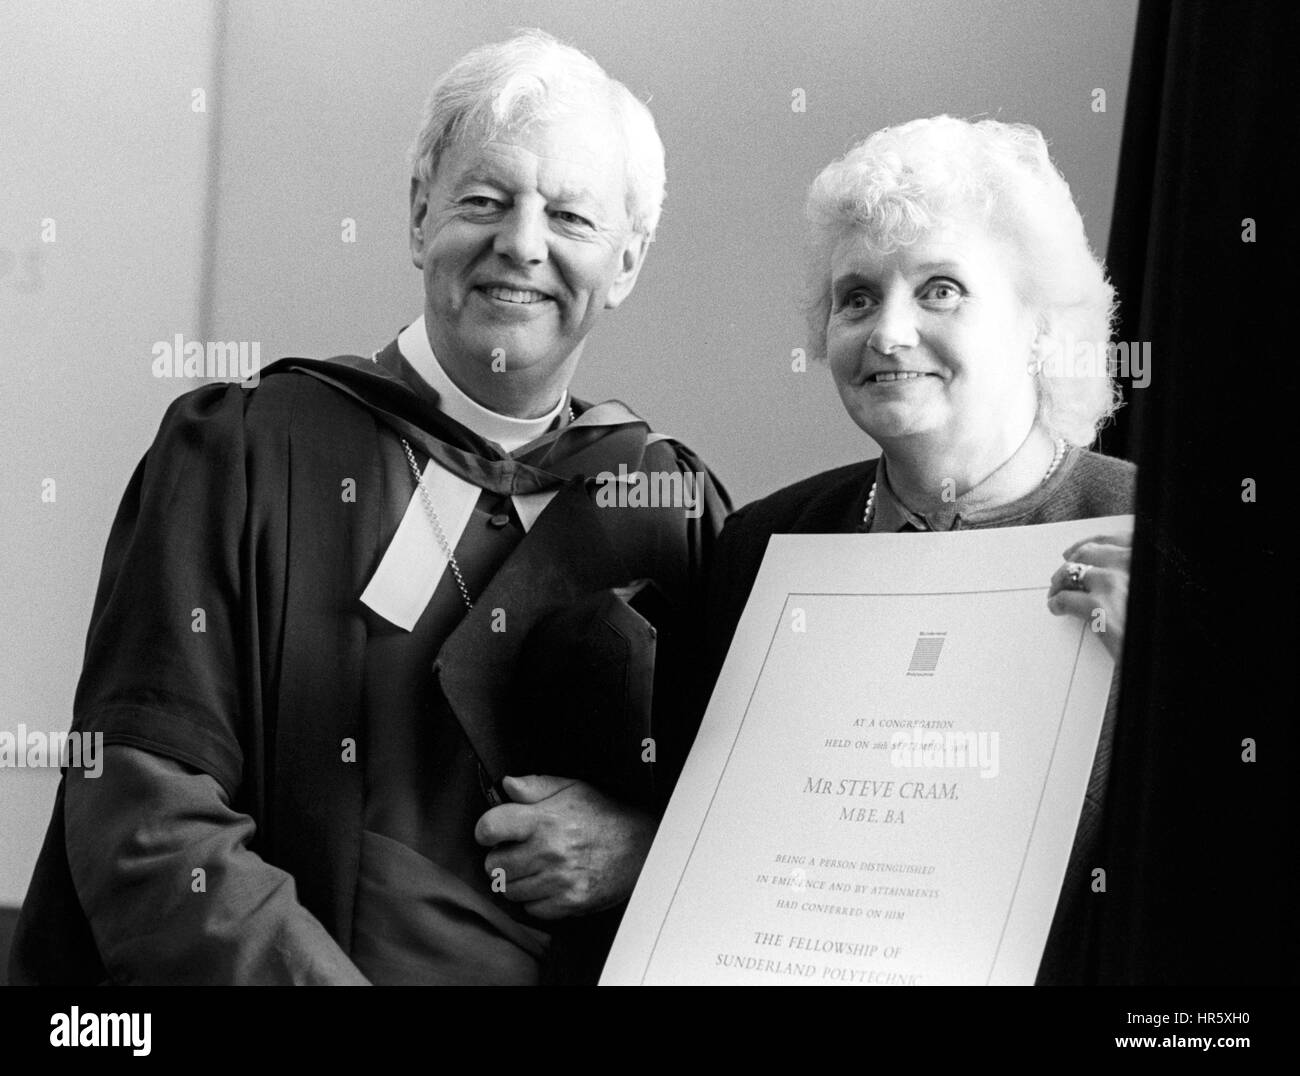 The Bishop of Durham, the Right Reverend David Jenkins and Mrs Maria Cram collecting Honorary Fellowships at the Sunderland Polytechnic. Mrs Cram, mother of athlete Steve Cram, was collecting the award on behalf of her son who was in Paris. Stock Photo